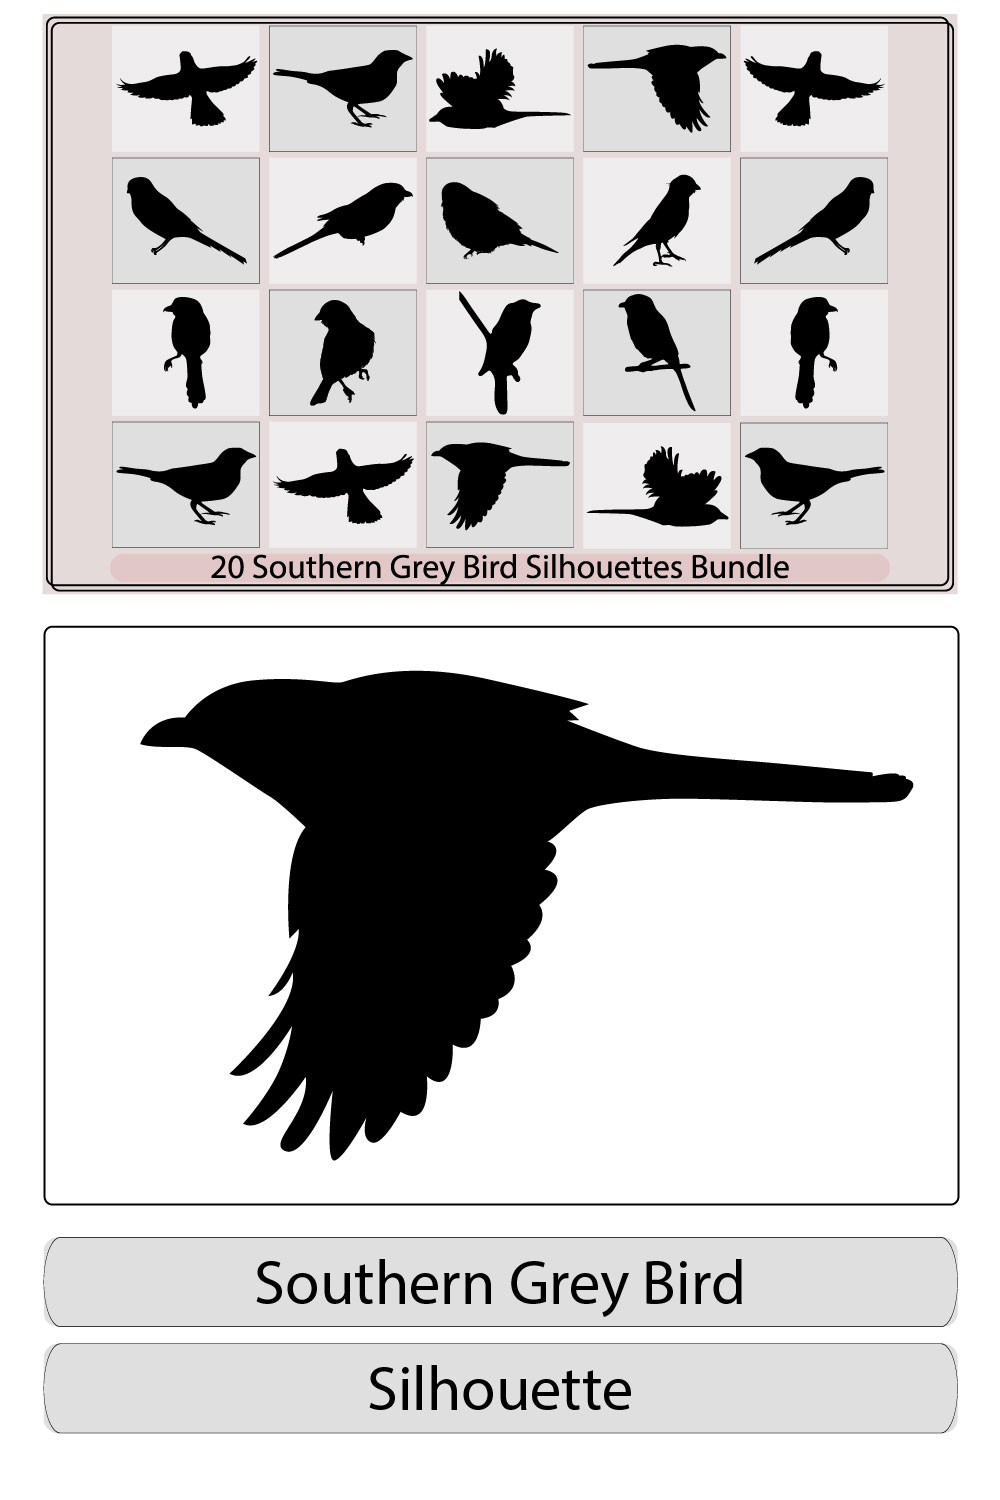 southern grey shrike bird silhouettes,southern grey shrike bird illustration,southern grey shrike bird vector pinterest preview image.